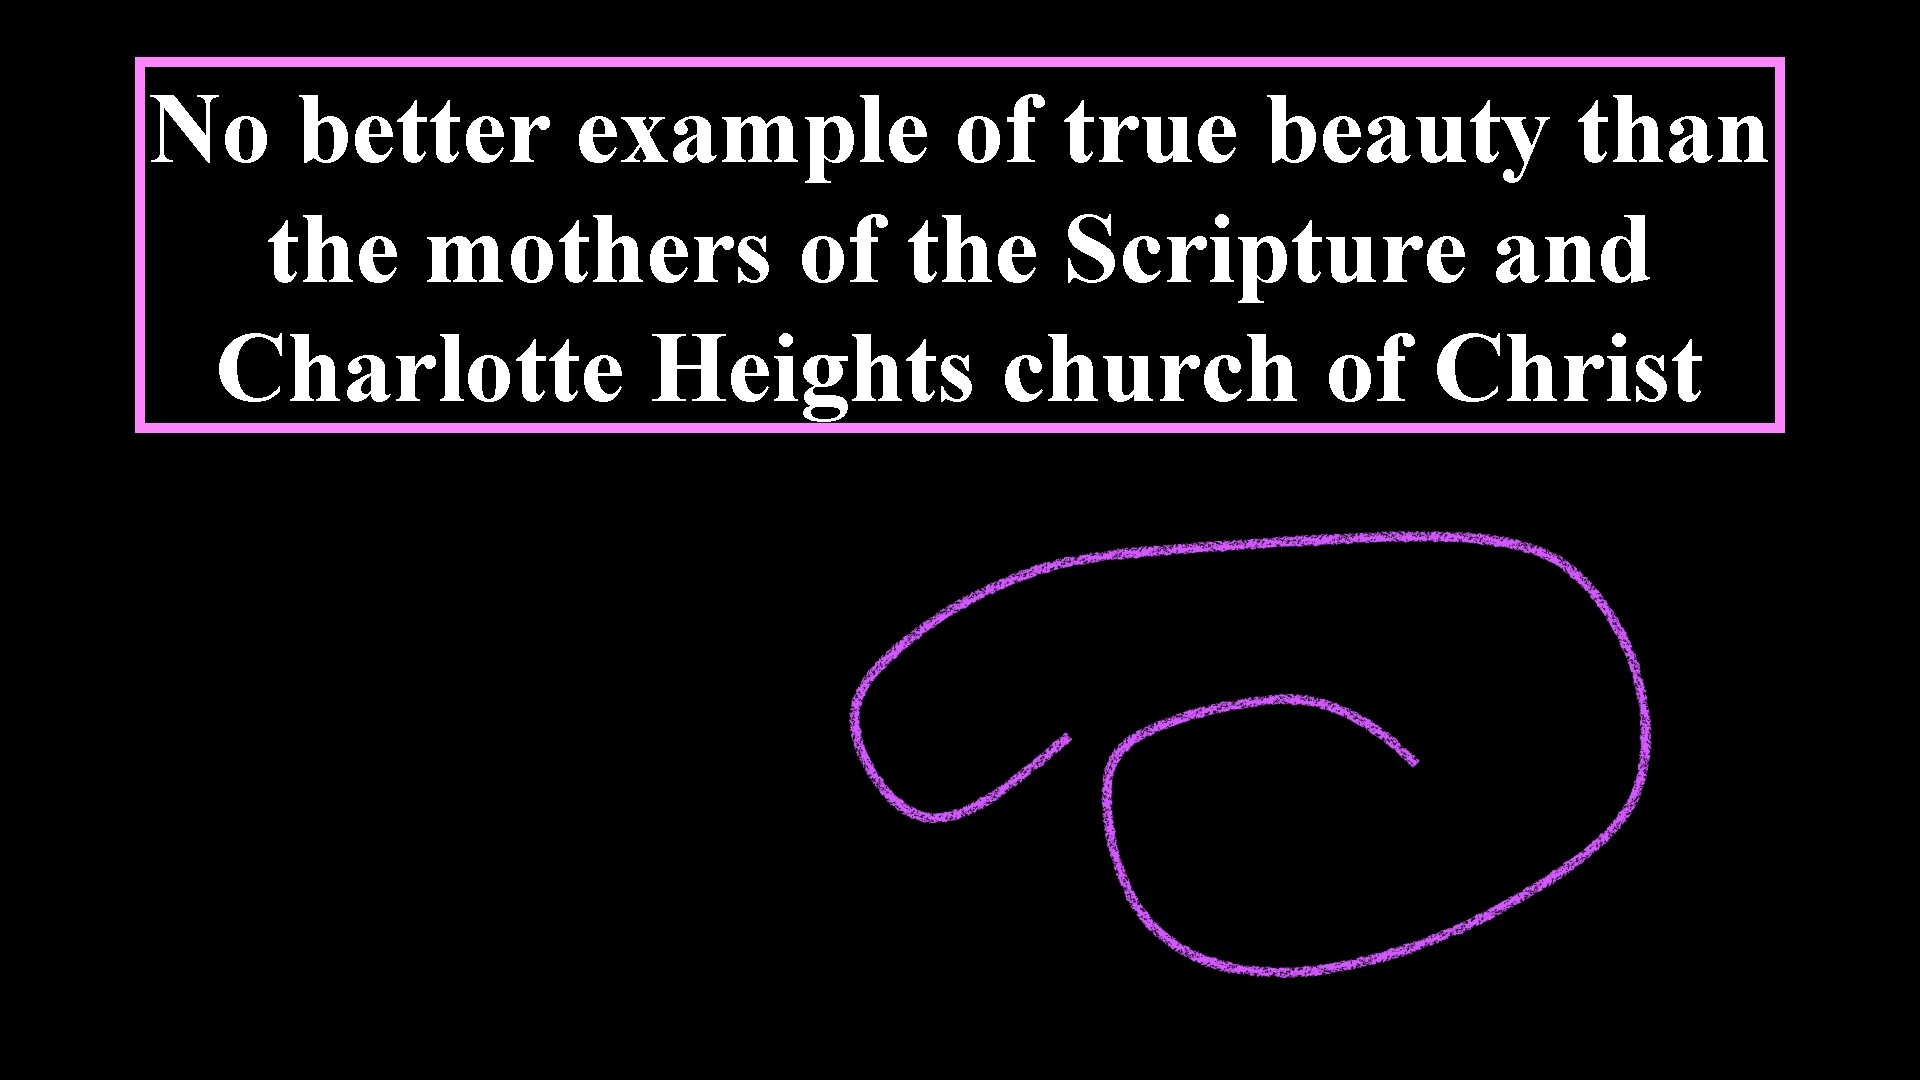 No better example of true beauty than the mothers of the Scripture and Charlotte